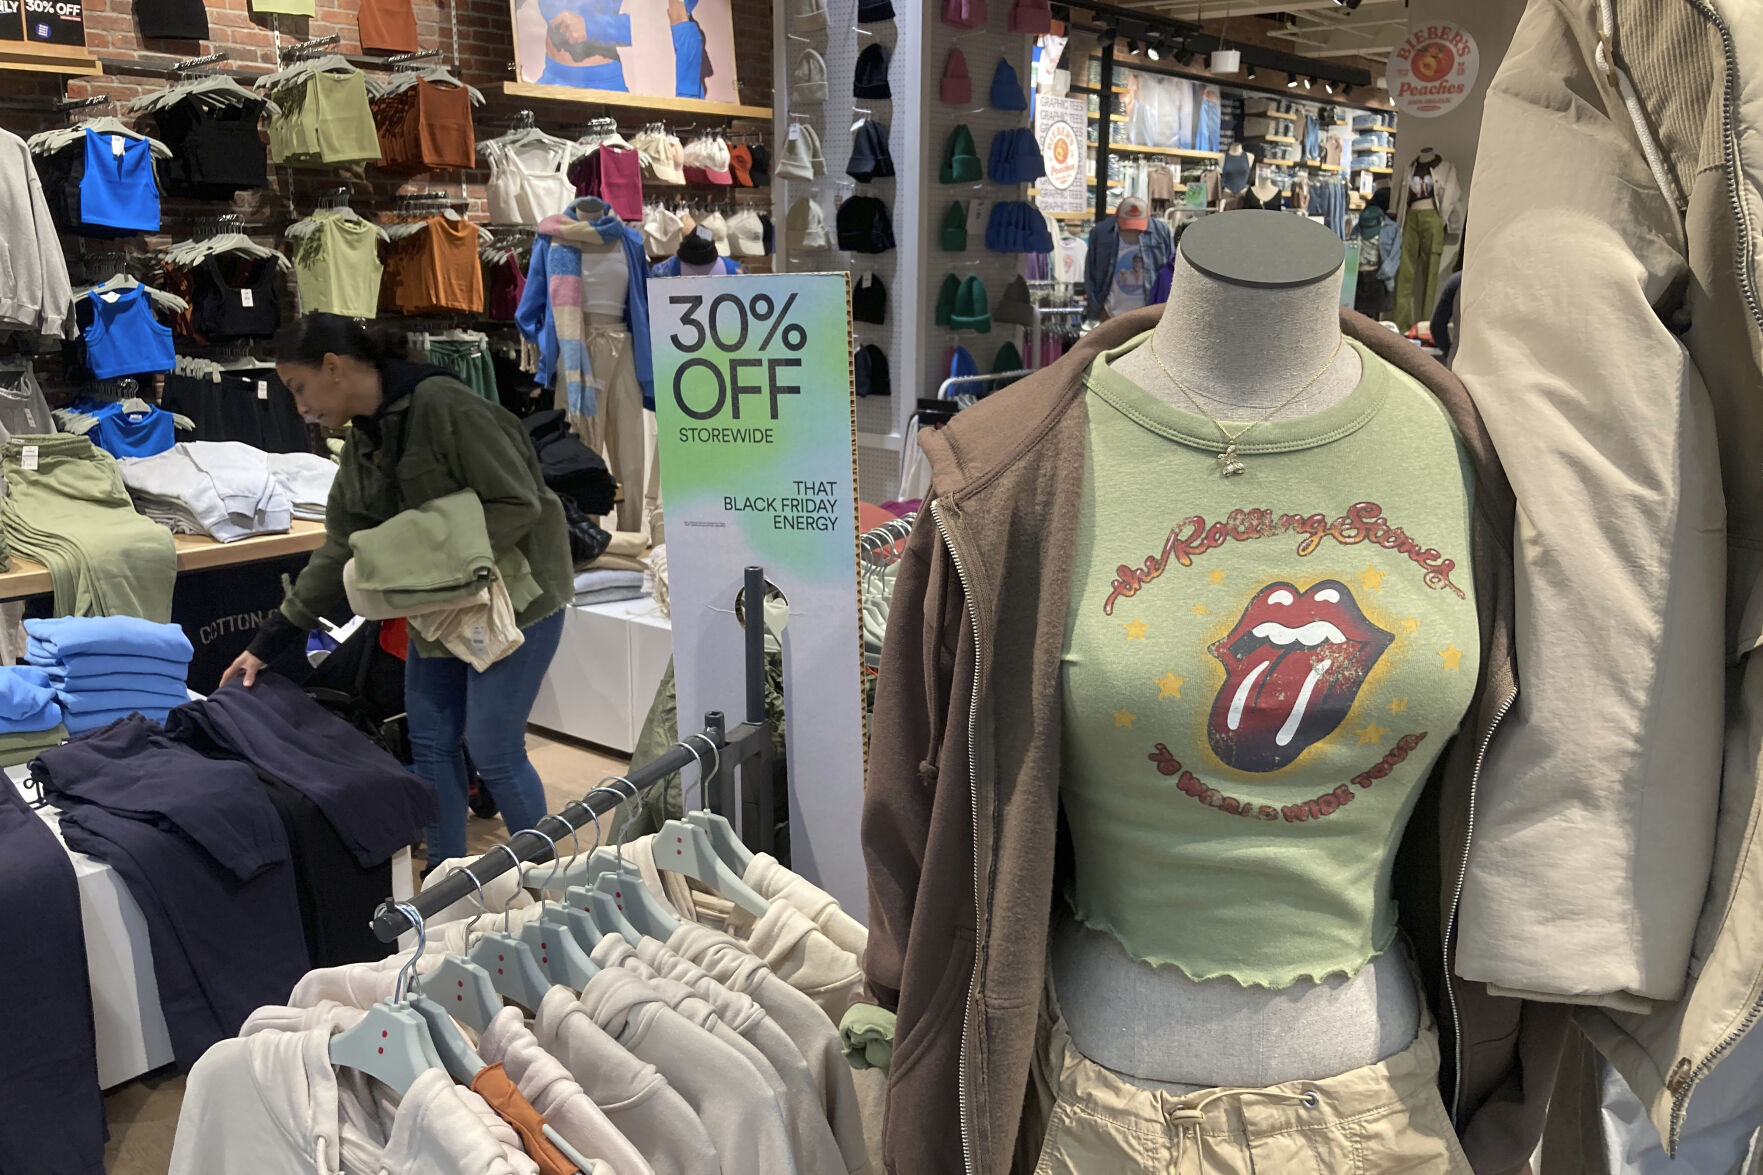 <p>FILE - A Rolling Stones t-shirt from 1970 is displayed in the Westfield Garden State Plaza shopping mall in Paramus, New Jersey, on Saturday, December 17, 2022. On Thursday, the Labor Department reports on U.S. consumer prices for December. (AP Photo/Ted Shaffrey, File)</p>   PHOTO CREDIT: Ted Shaffrey 